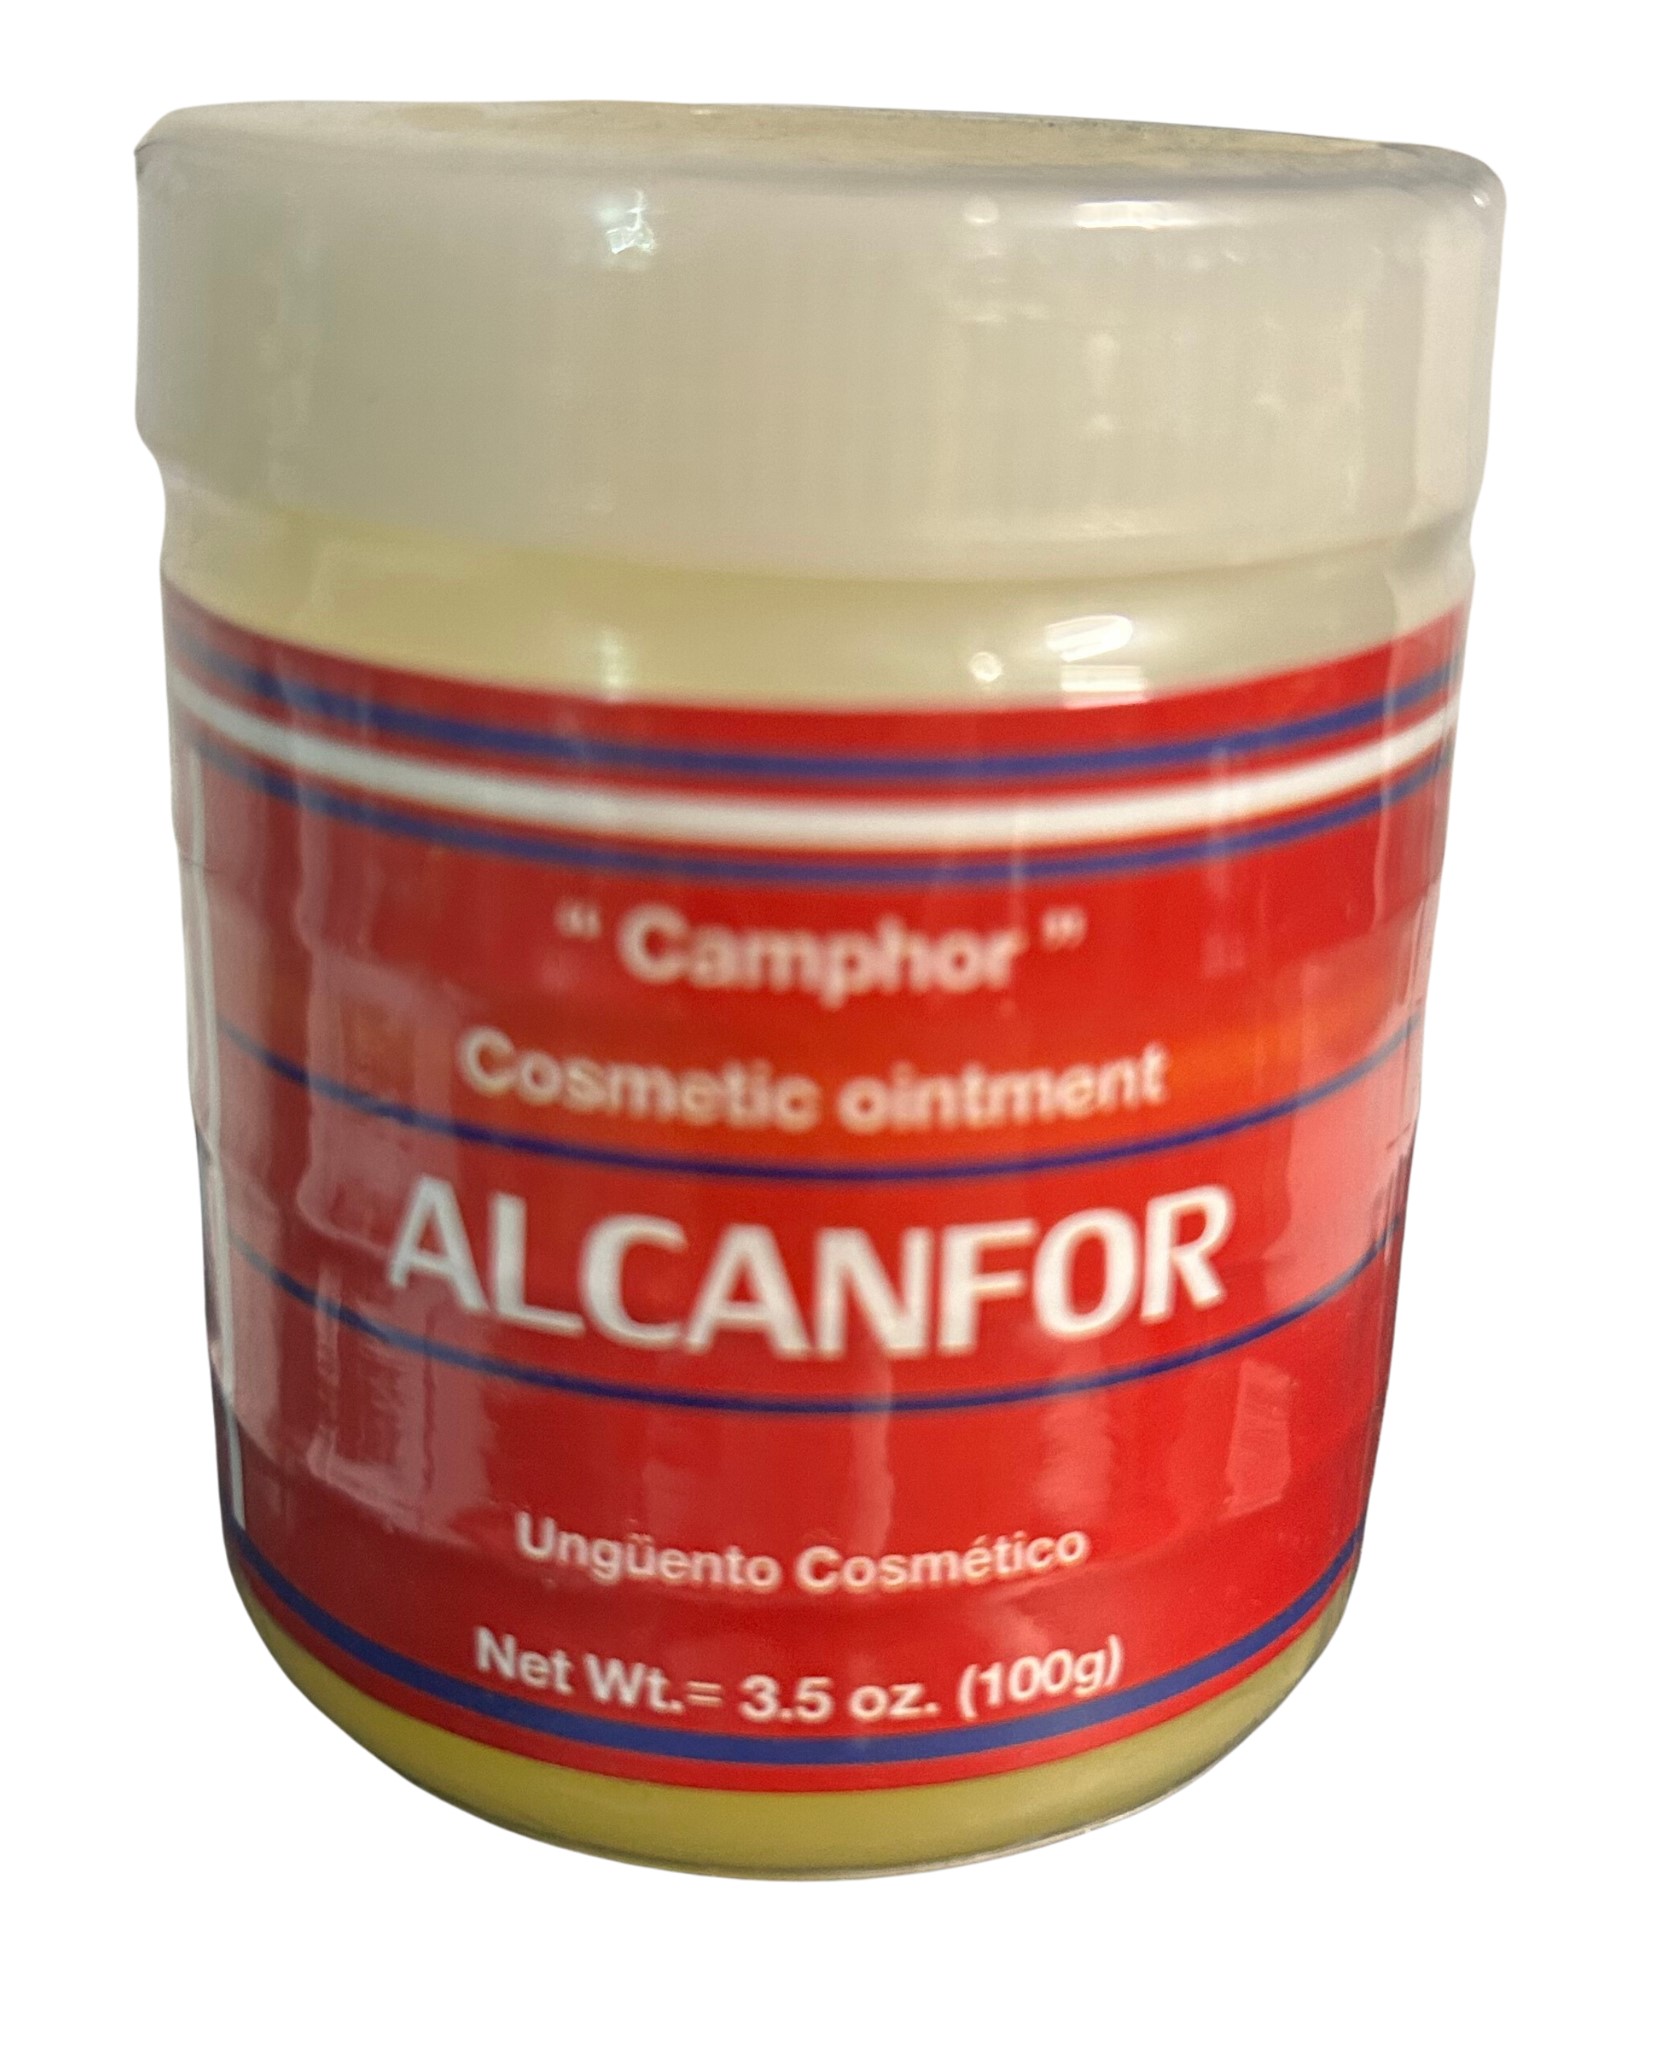 Plantimex Camphor Cosmetic Ointment - Alcanfor Unguento Cosmetico -Net Wt. 3.5 oz- (100g) - image 1 of 1